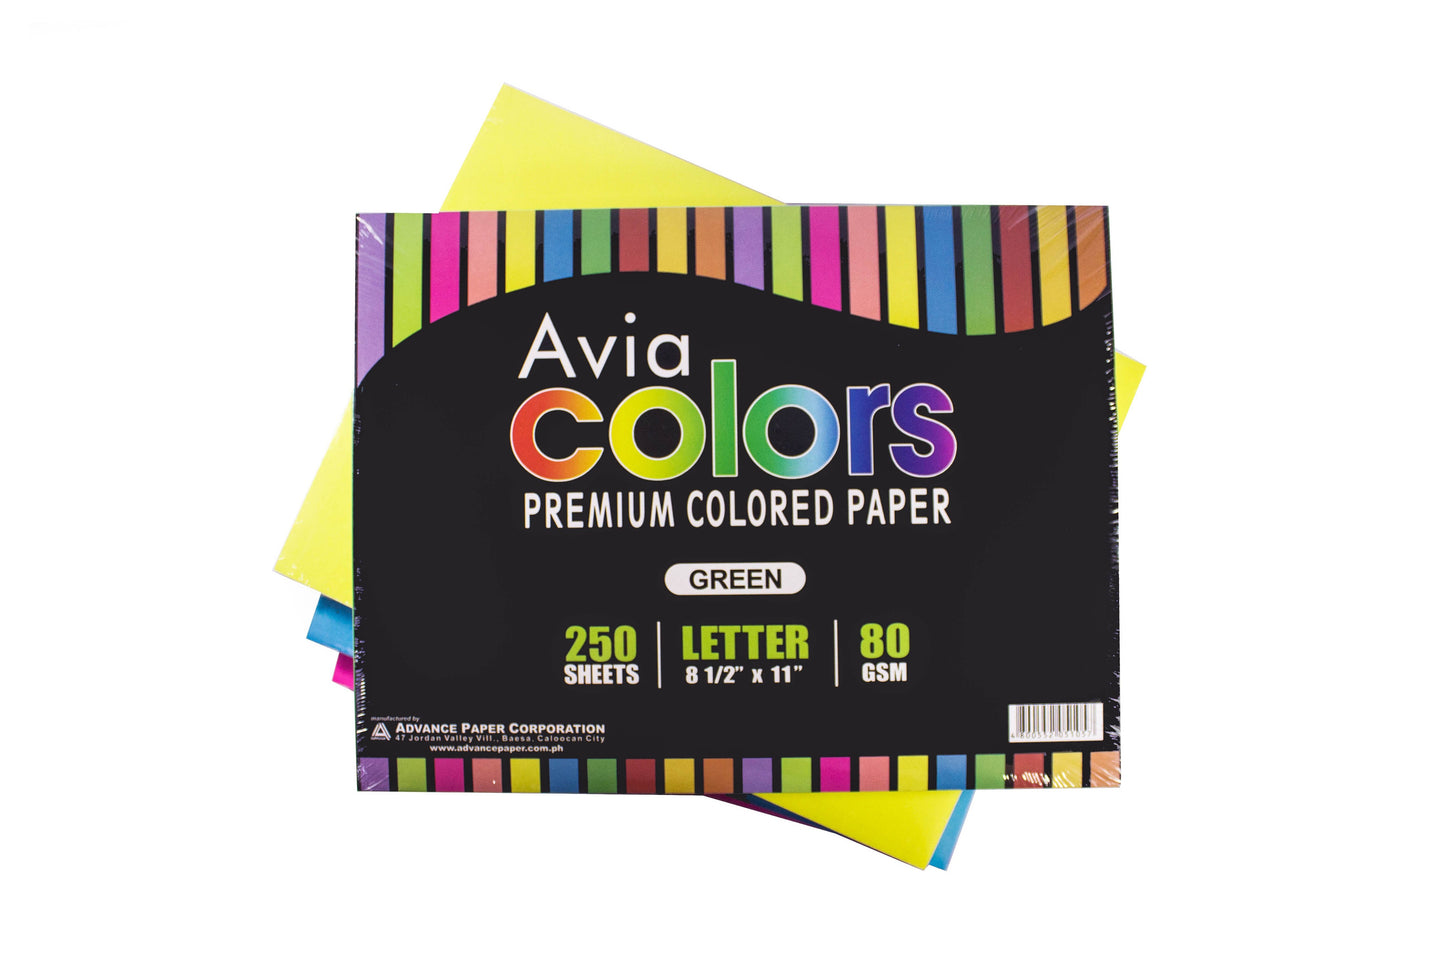 Avia Colored Paper 80gsm Letter Size